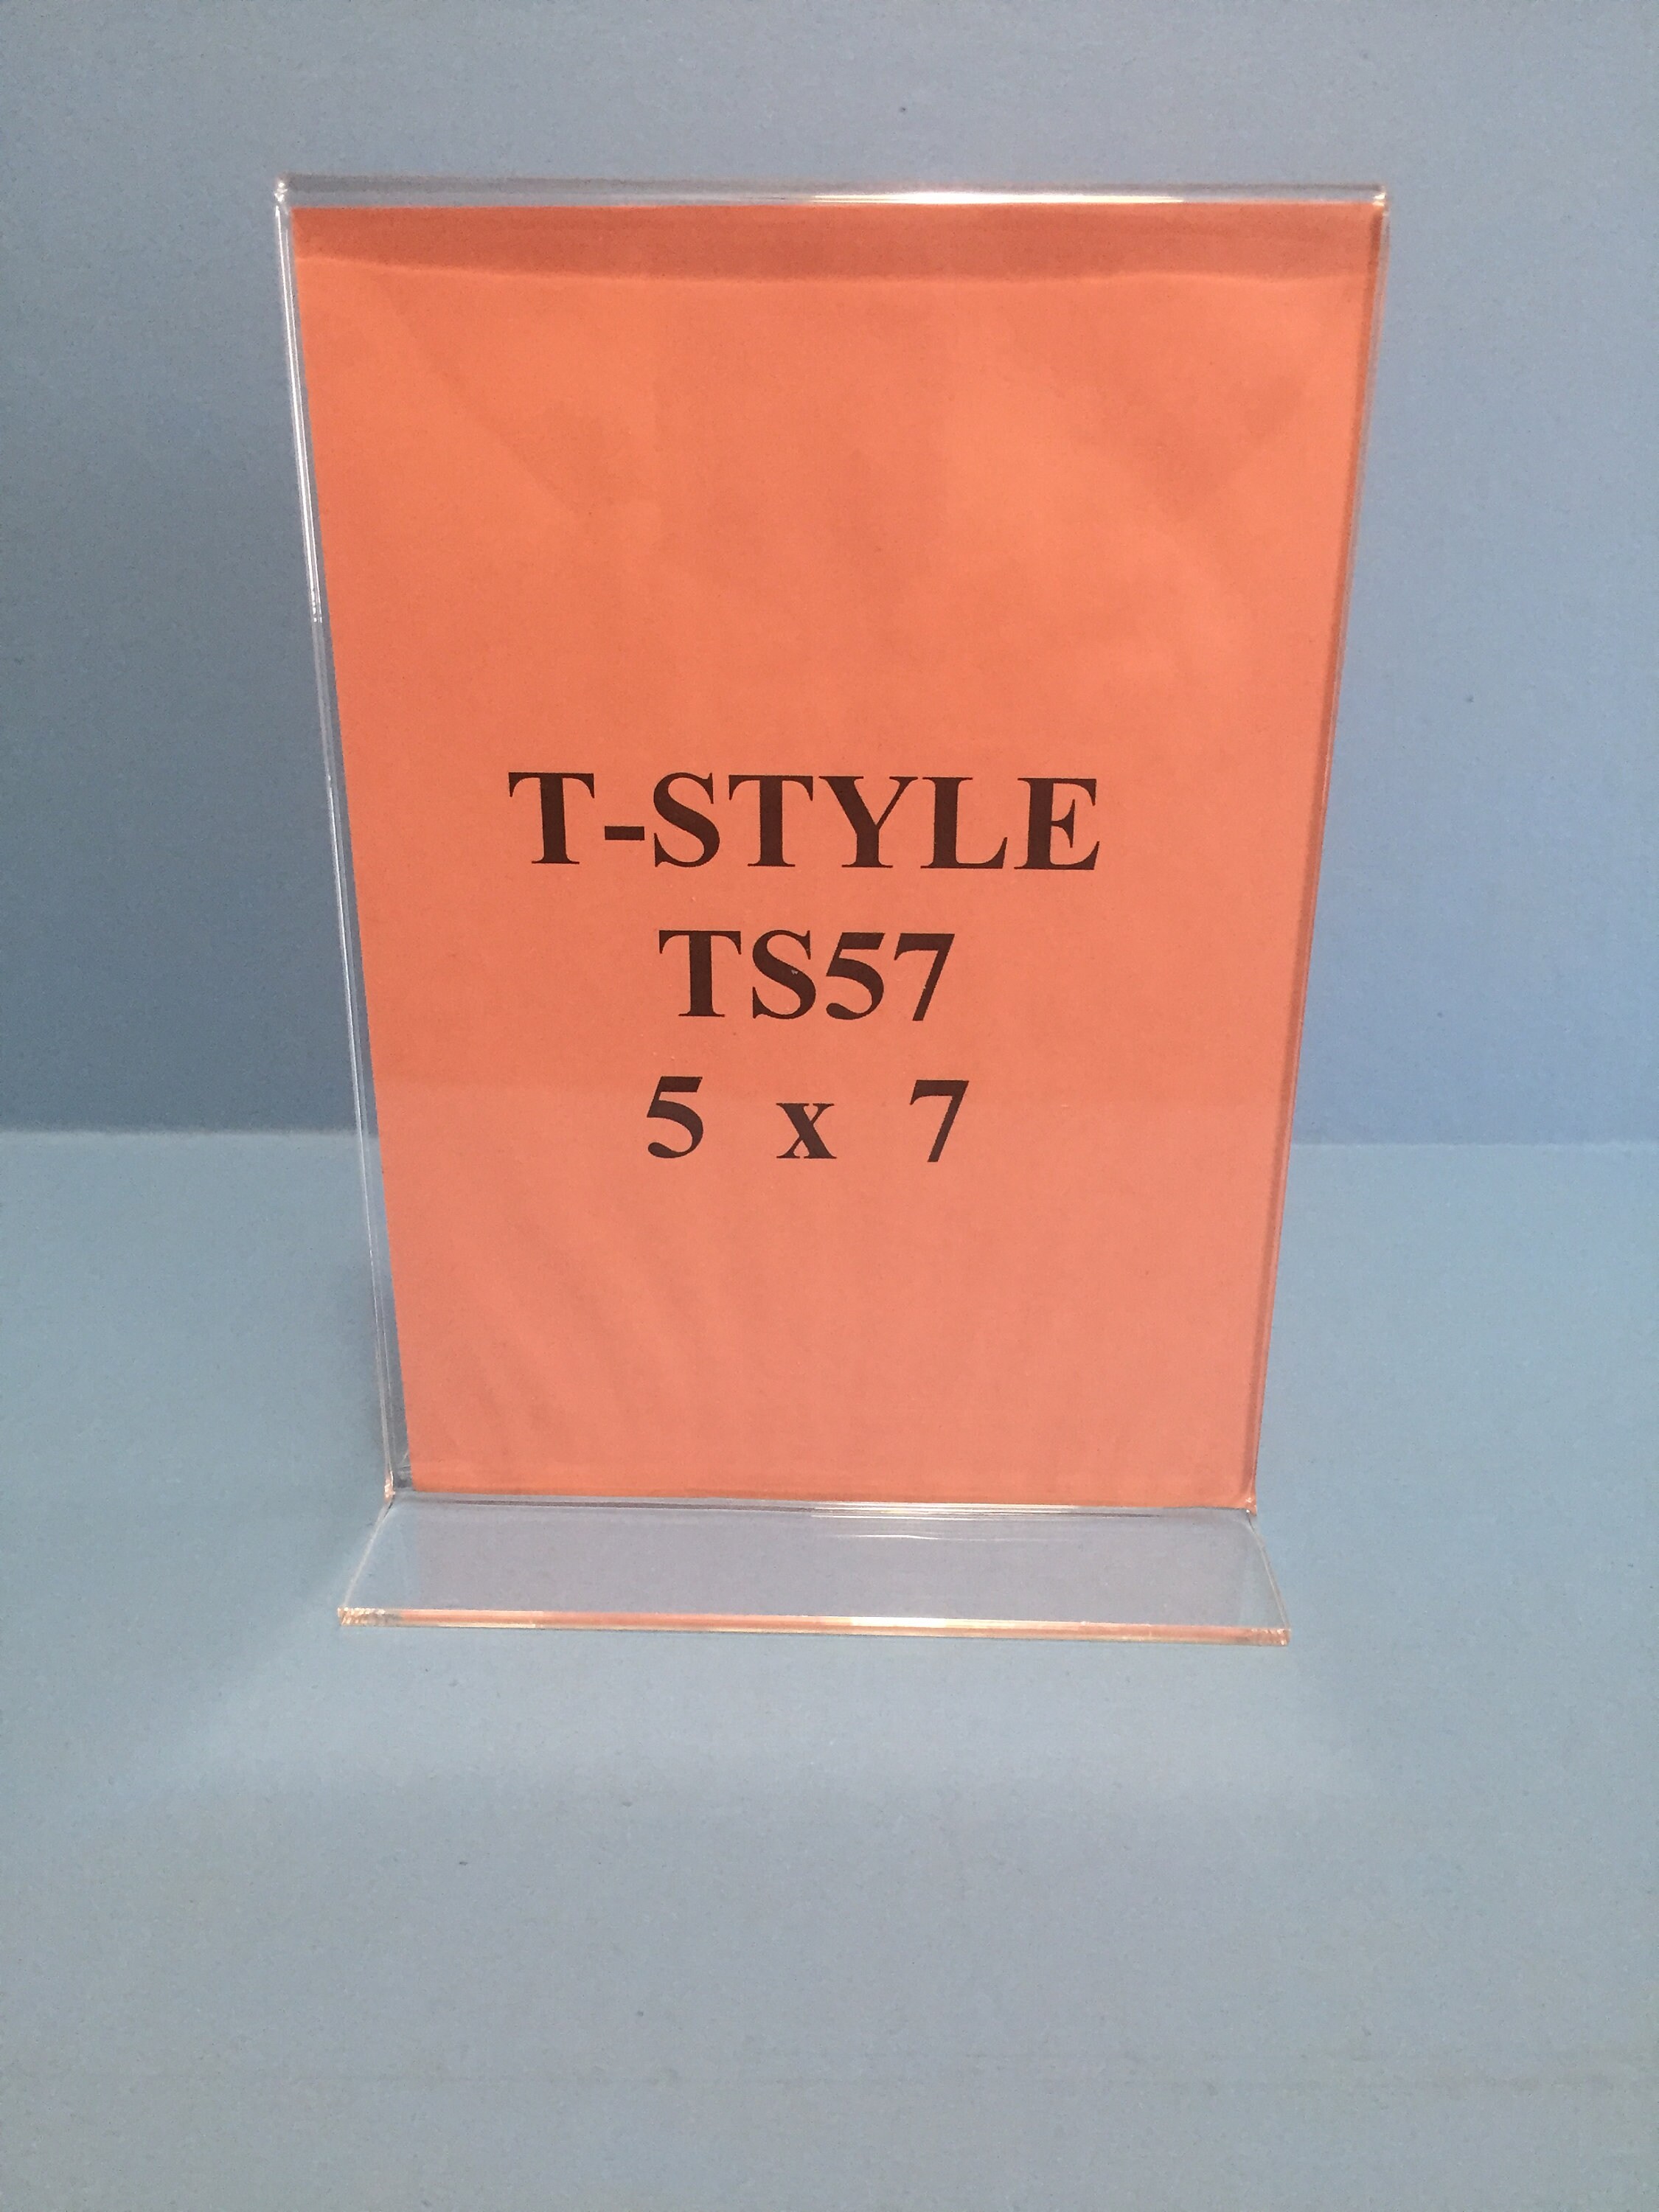 5 x 7 T-Style Top Loading Acrylic Sign Holder, 405C